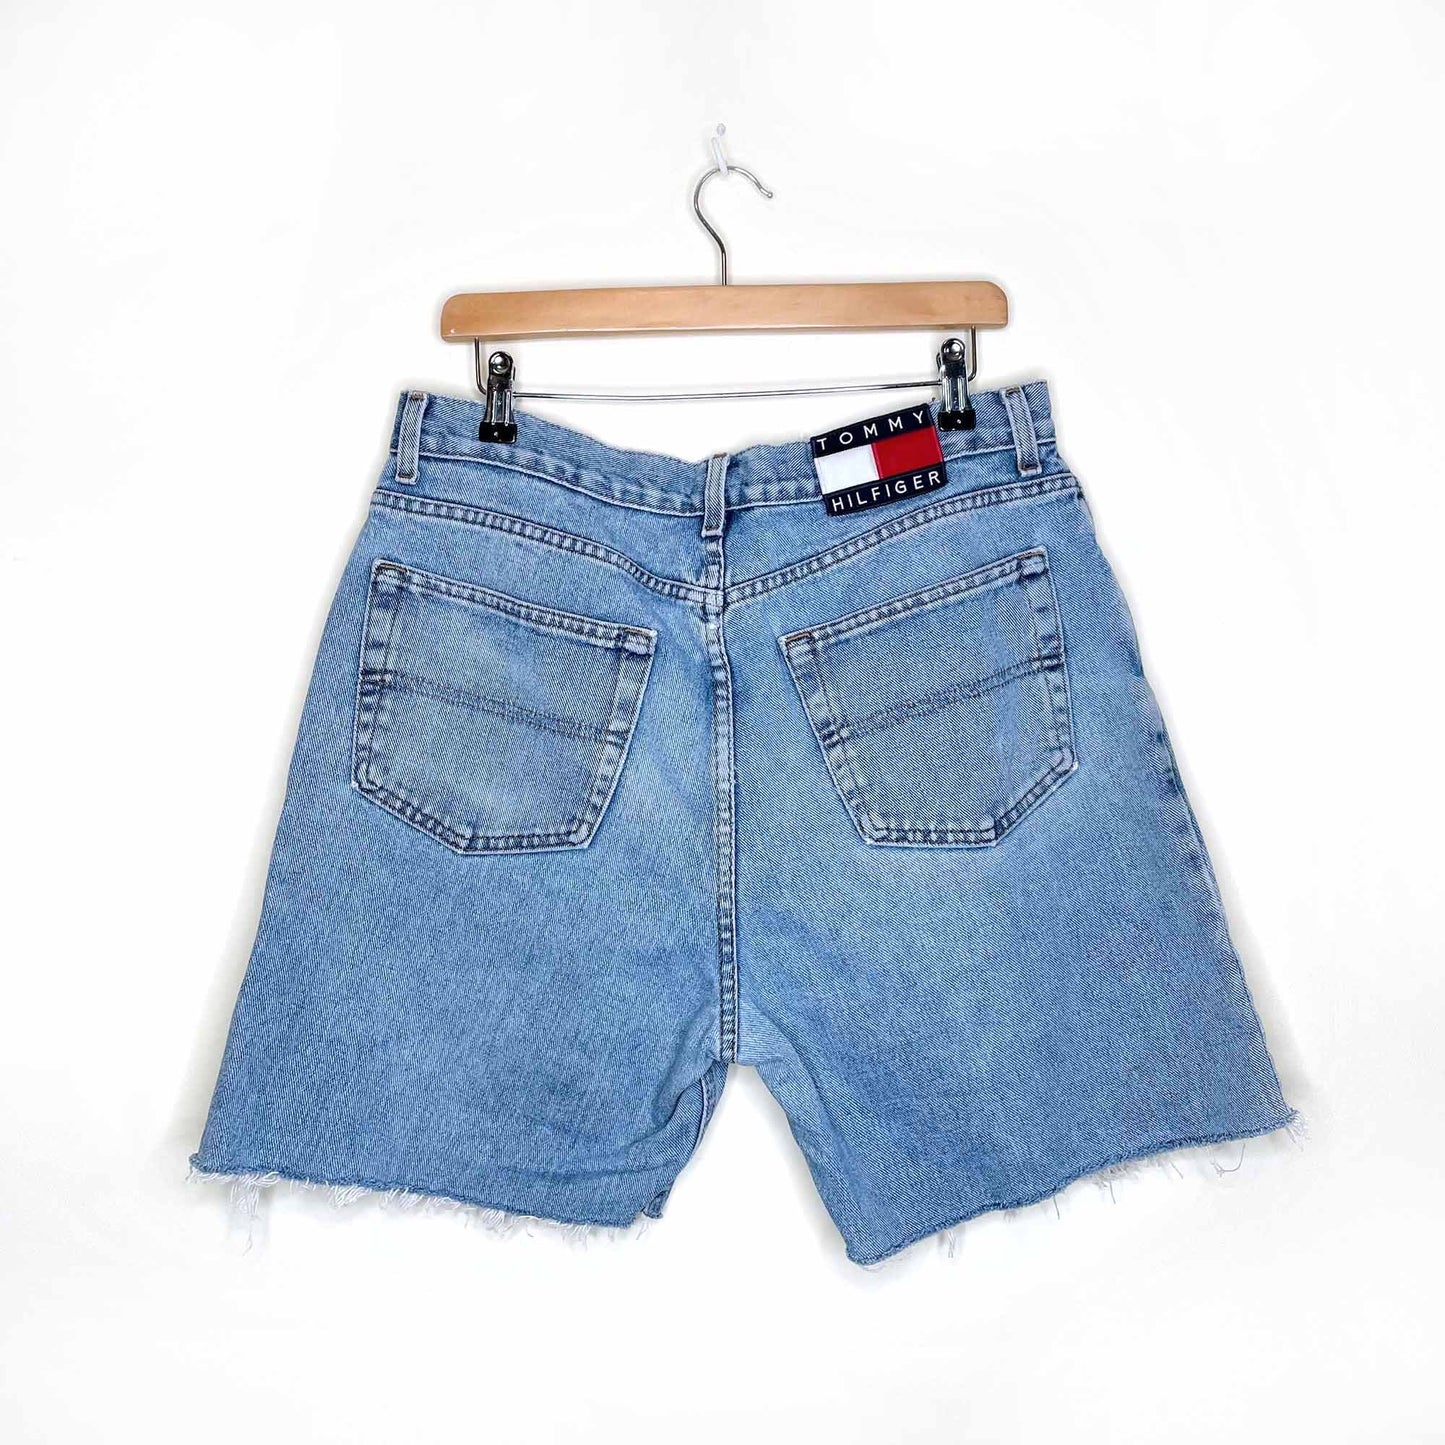 vintage tommy hilfiger freedom jeans cut off shorts - size 36